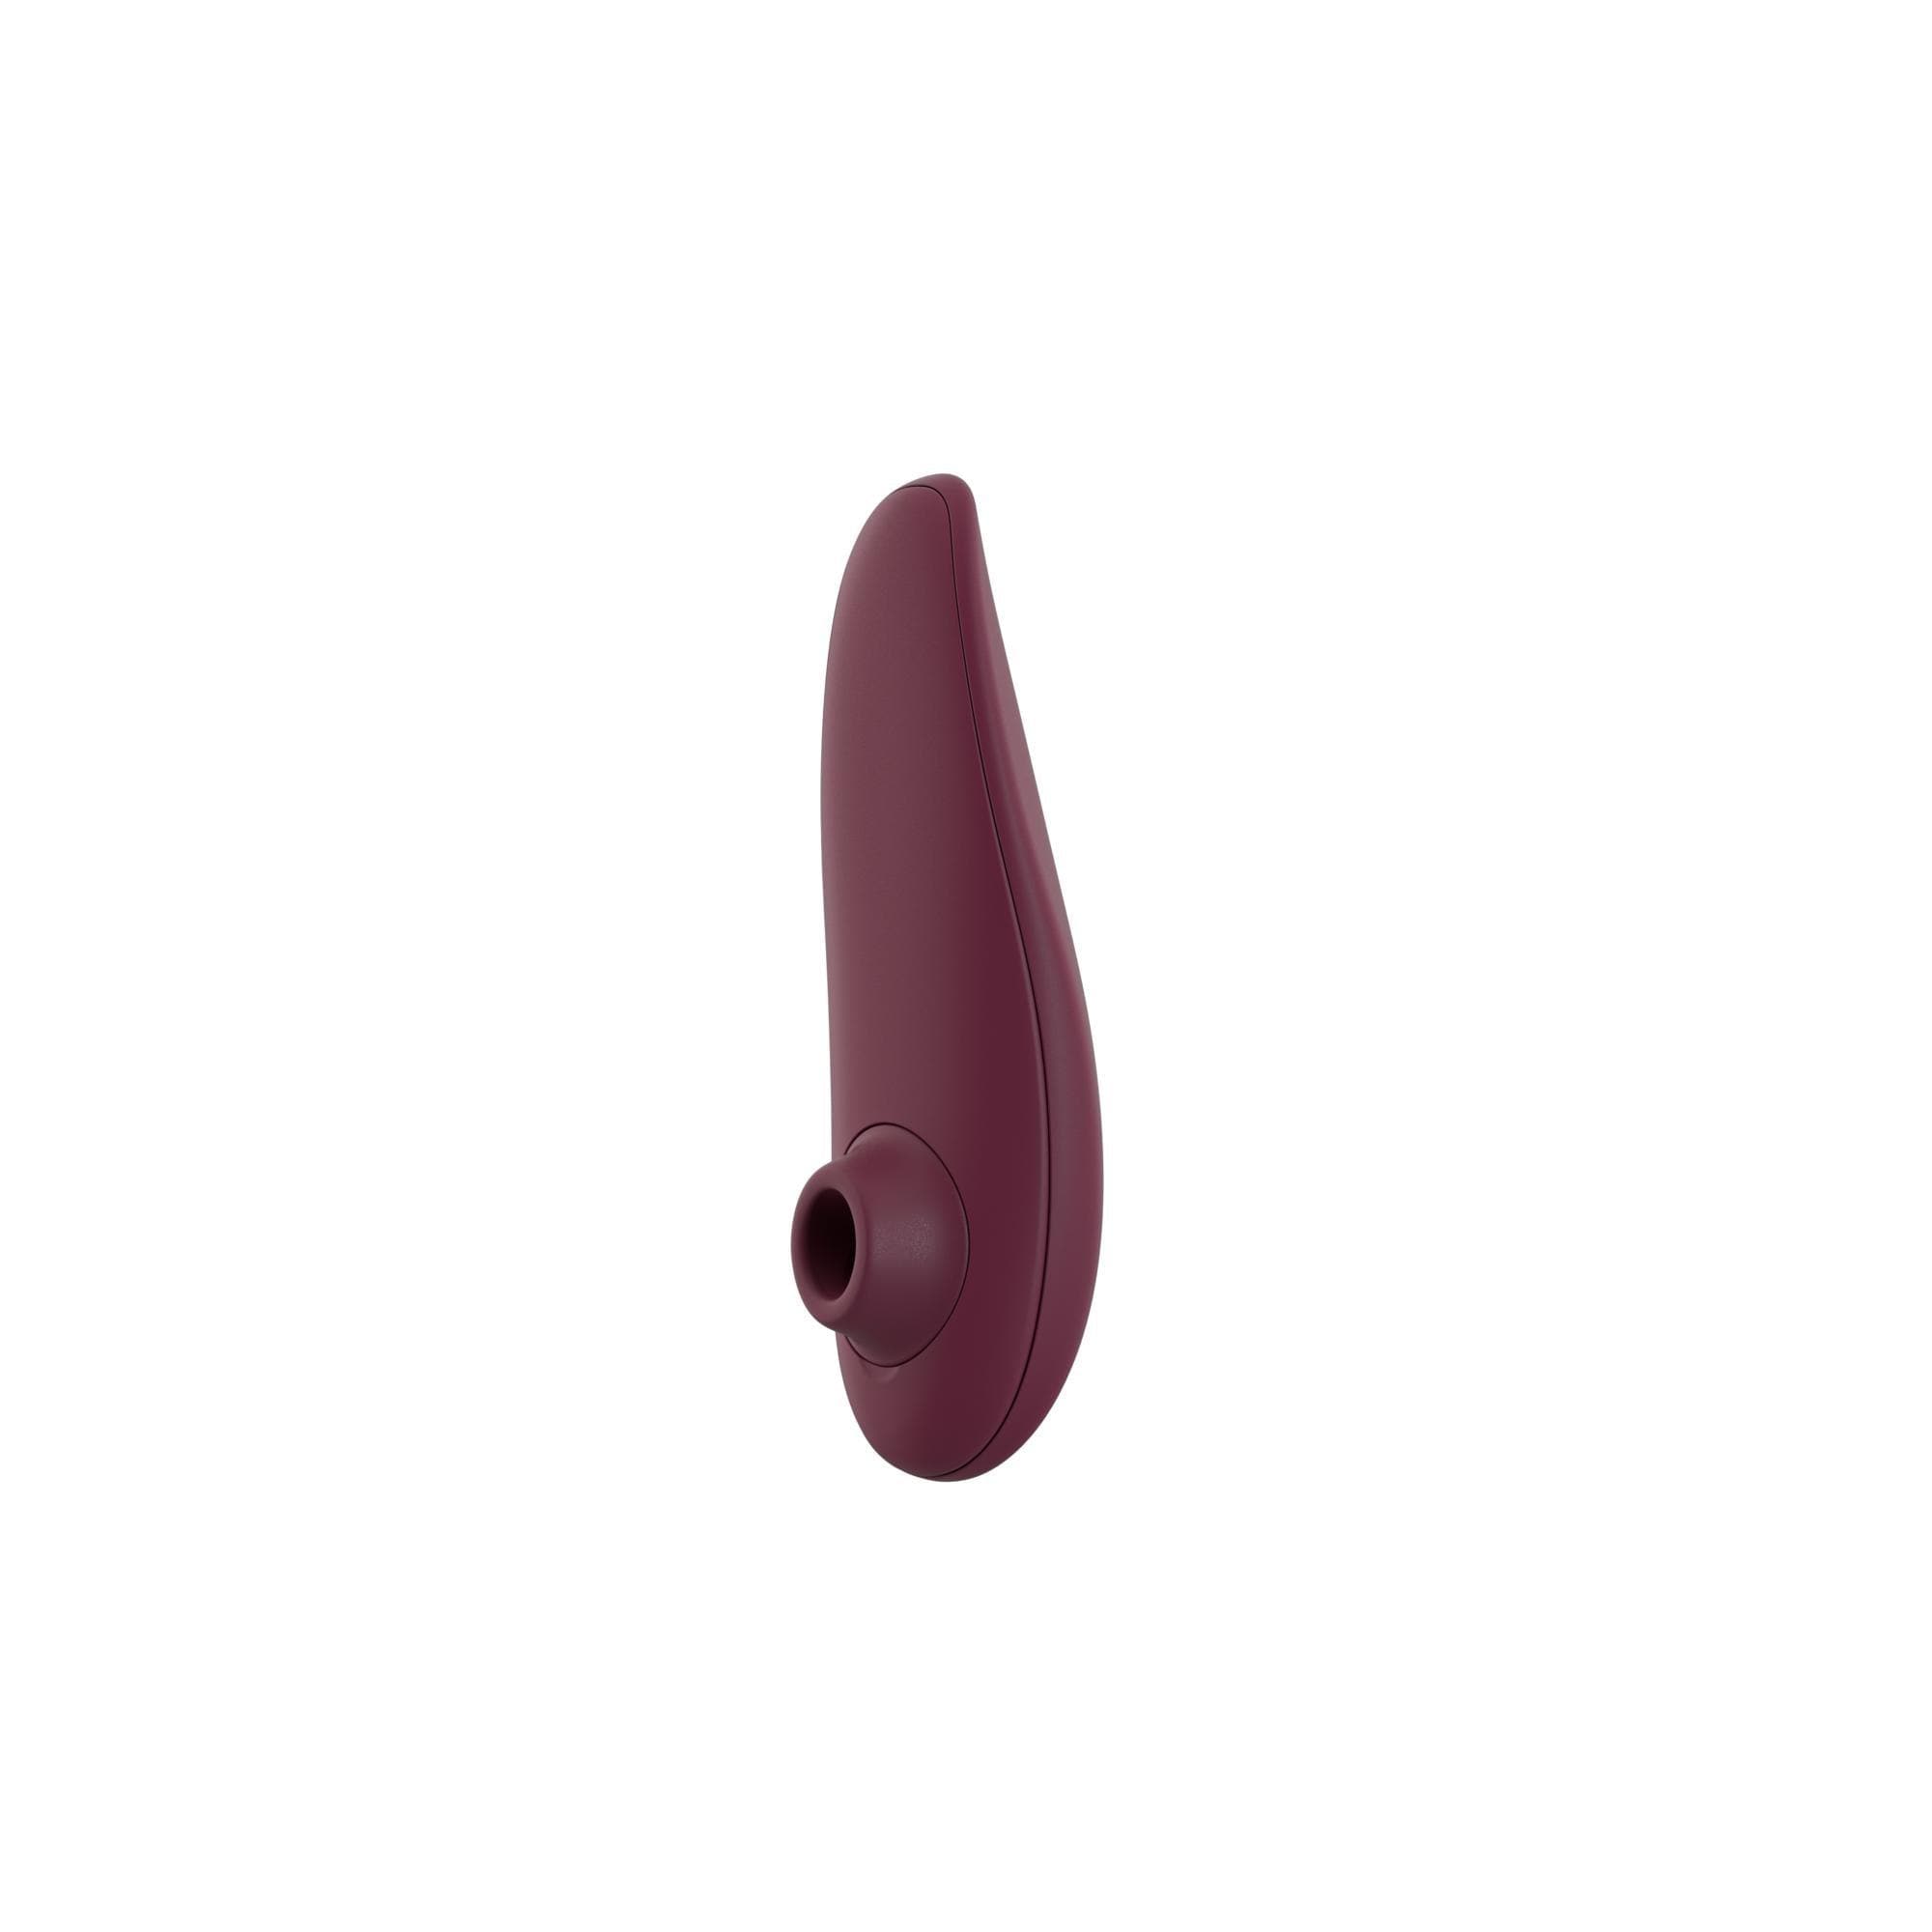 Womanizer Classic 2 Rechargeable 10 Level Clitoral Stimulator with PleasureAir - Romantic Blessings